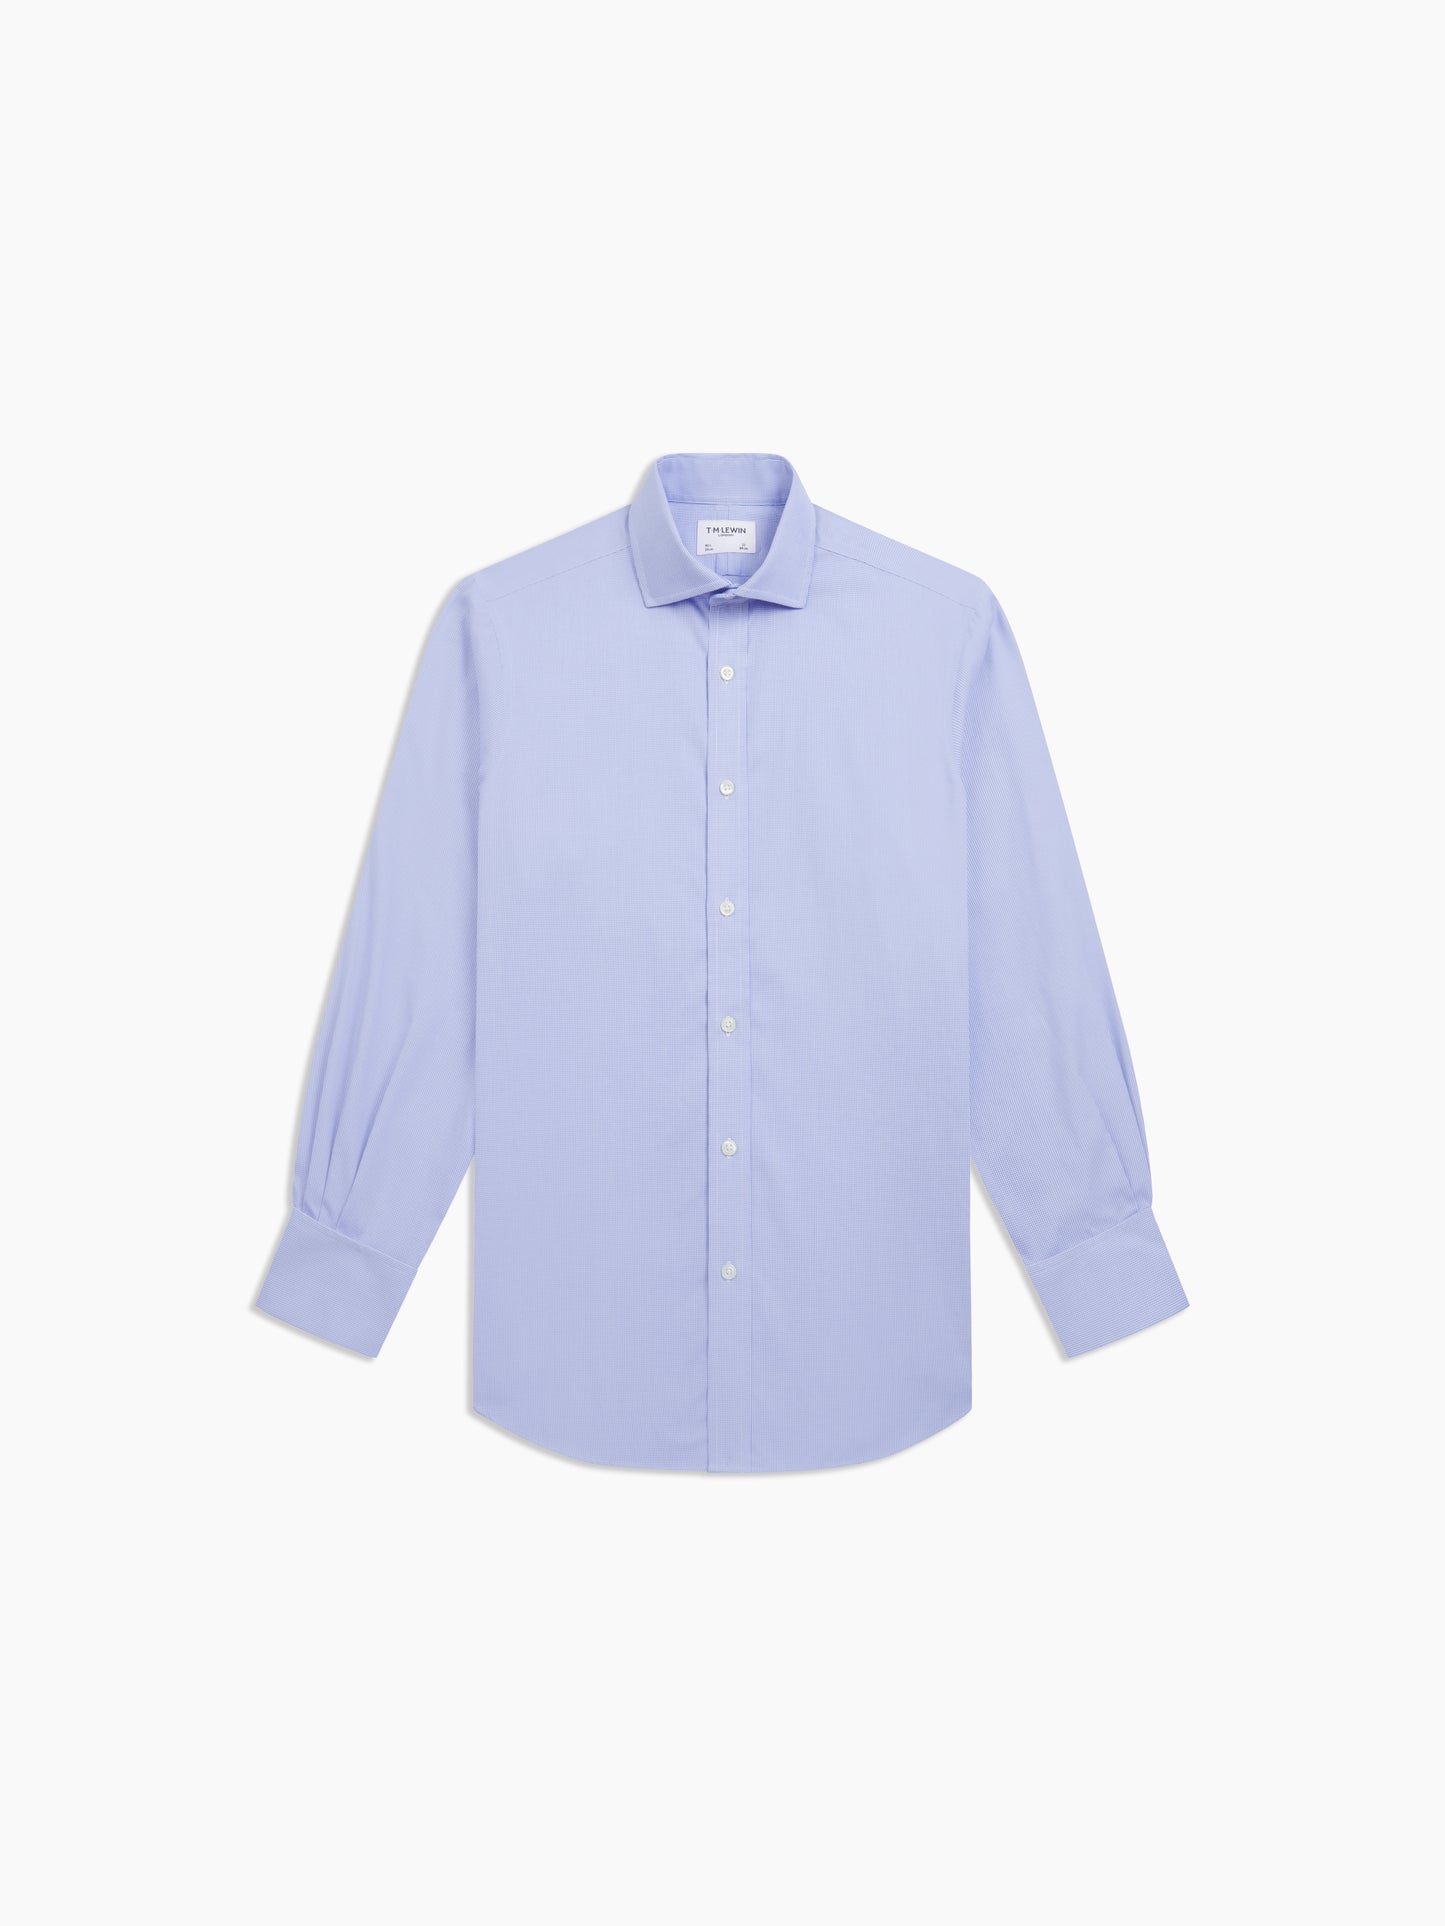 Image 2 of Non-Iron Blue Dogtooth Dobby Slim Fit Double Cuff Classic Collar Shirt